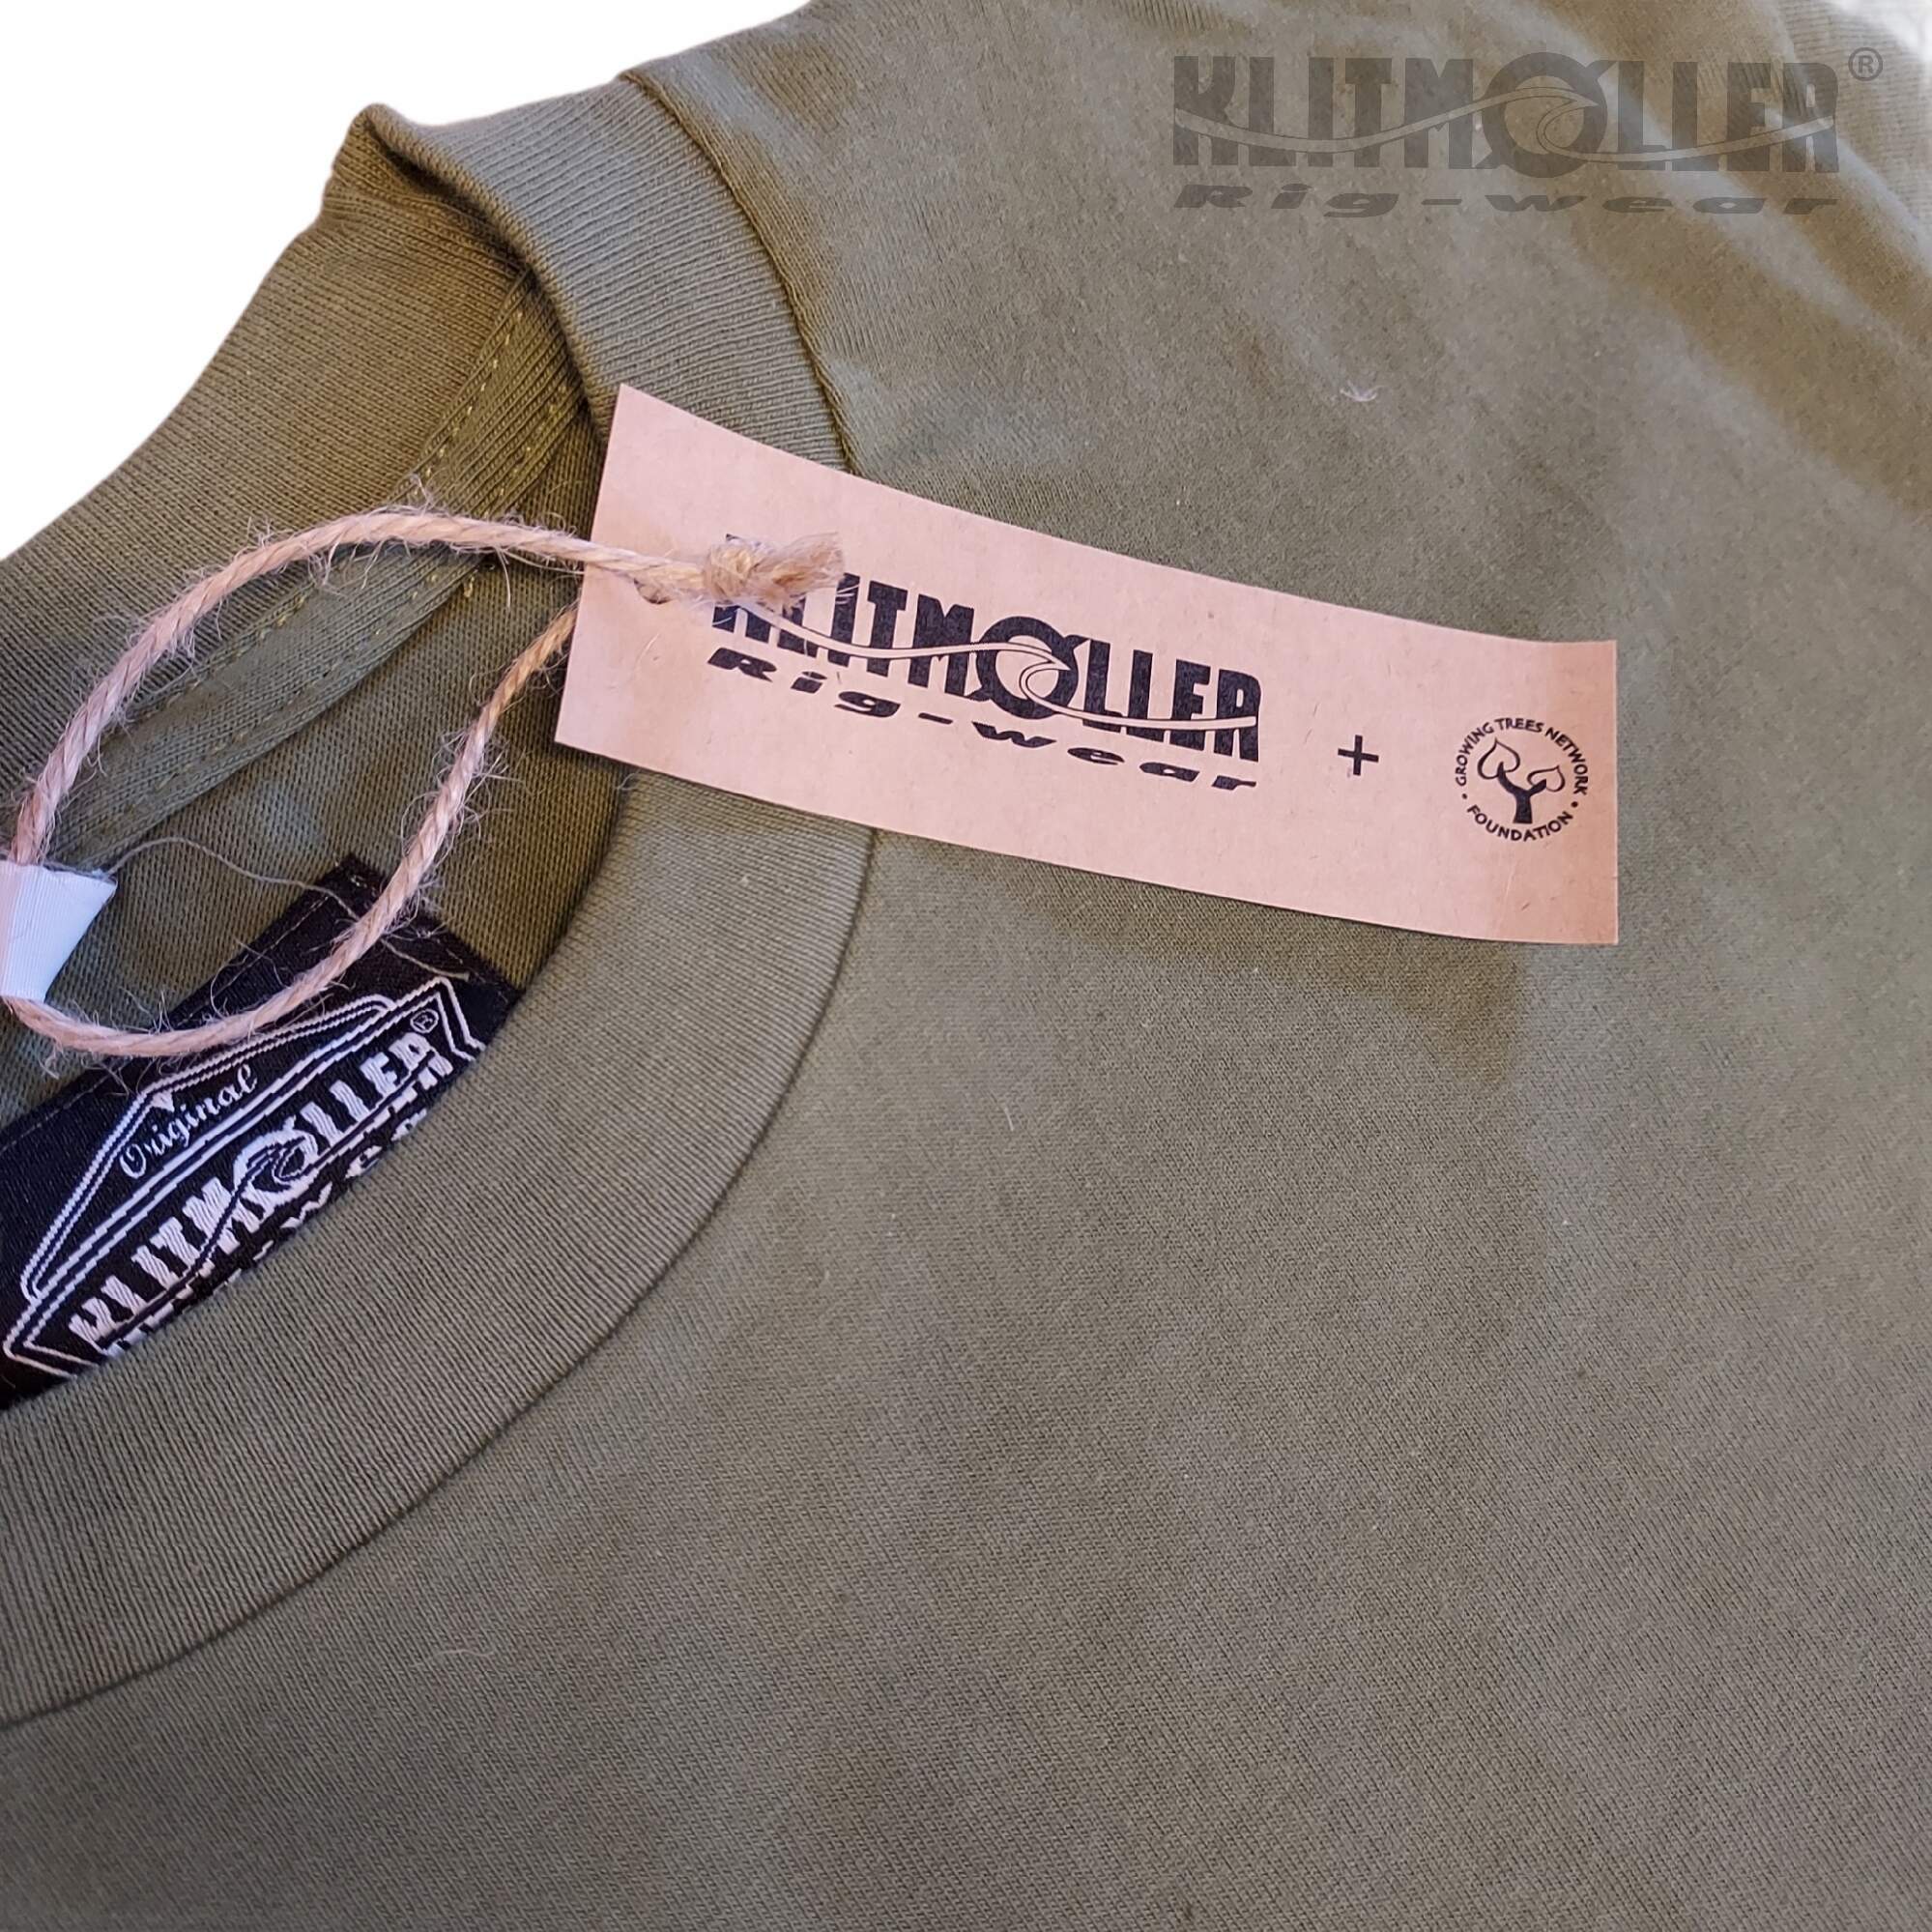 T-shirt Brushed Wave faded olive green